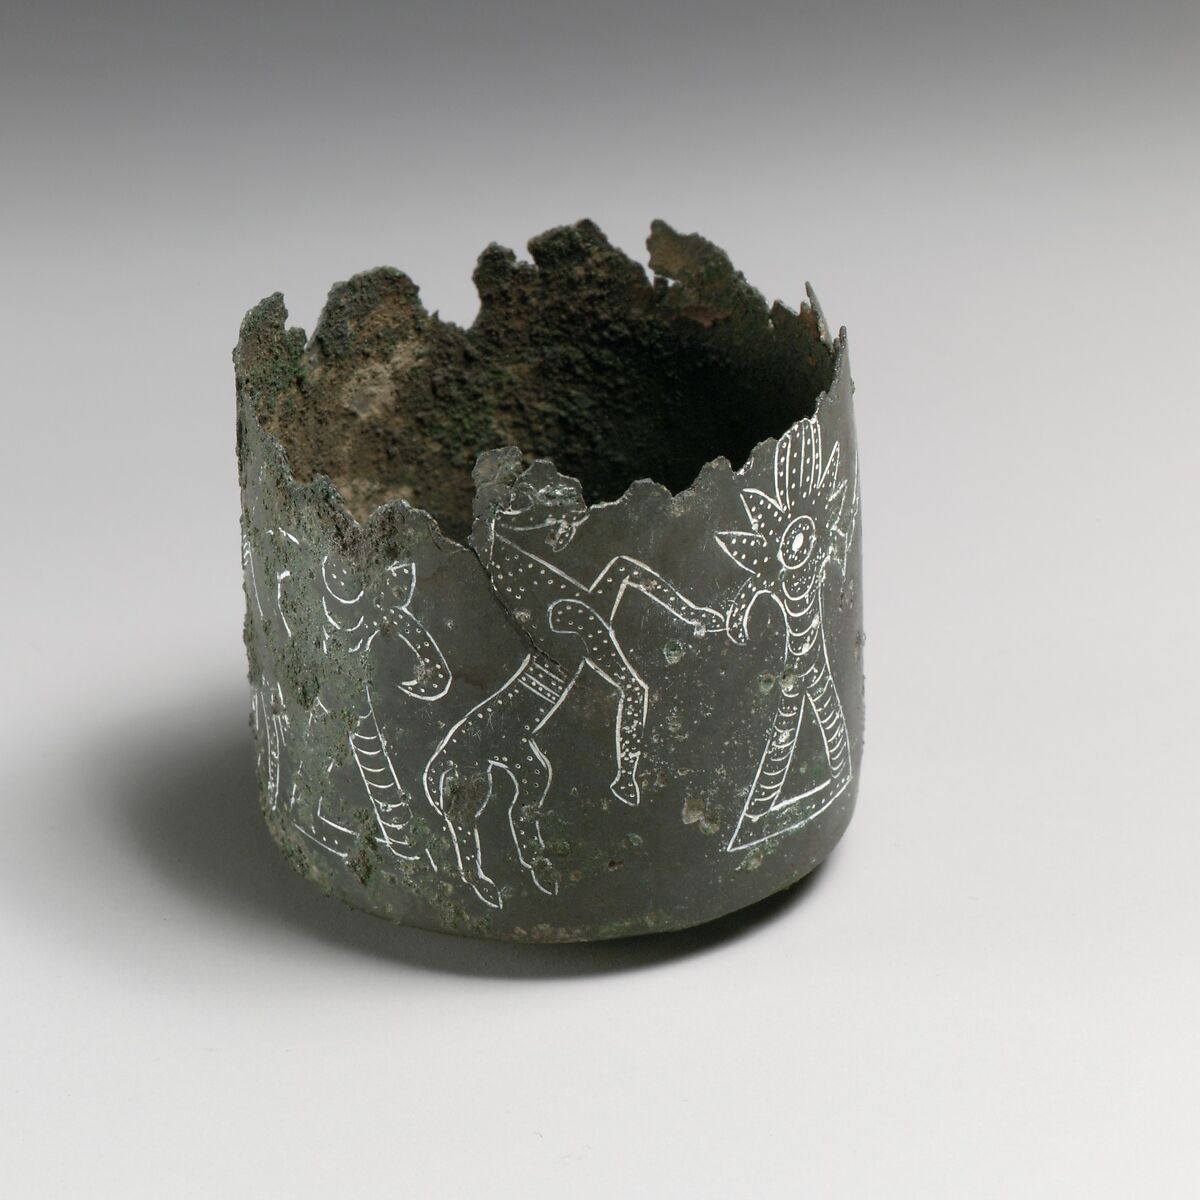 Engraved bronze pyxis (small box with lid), Bronze, Etruscan 